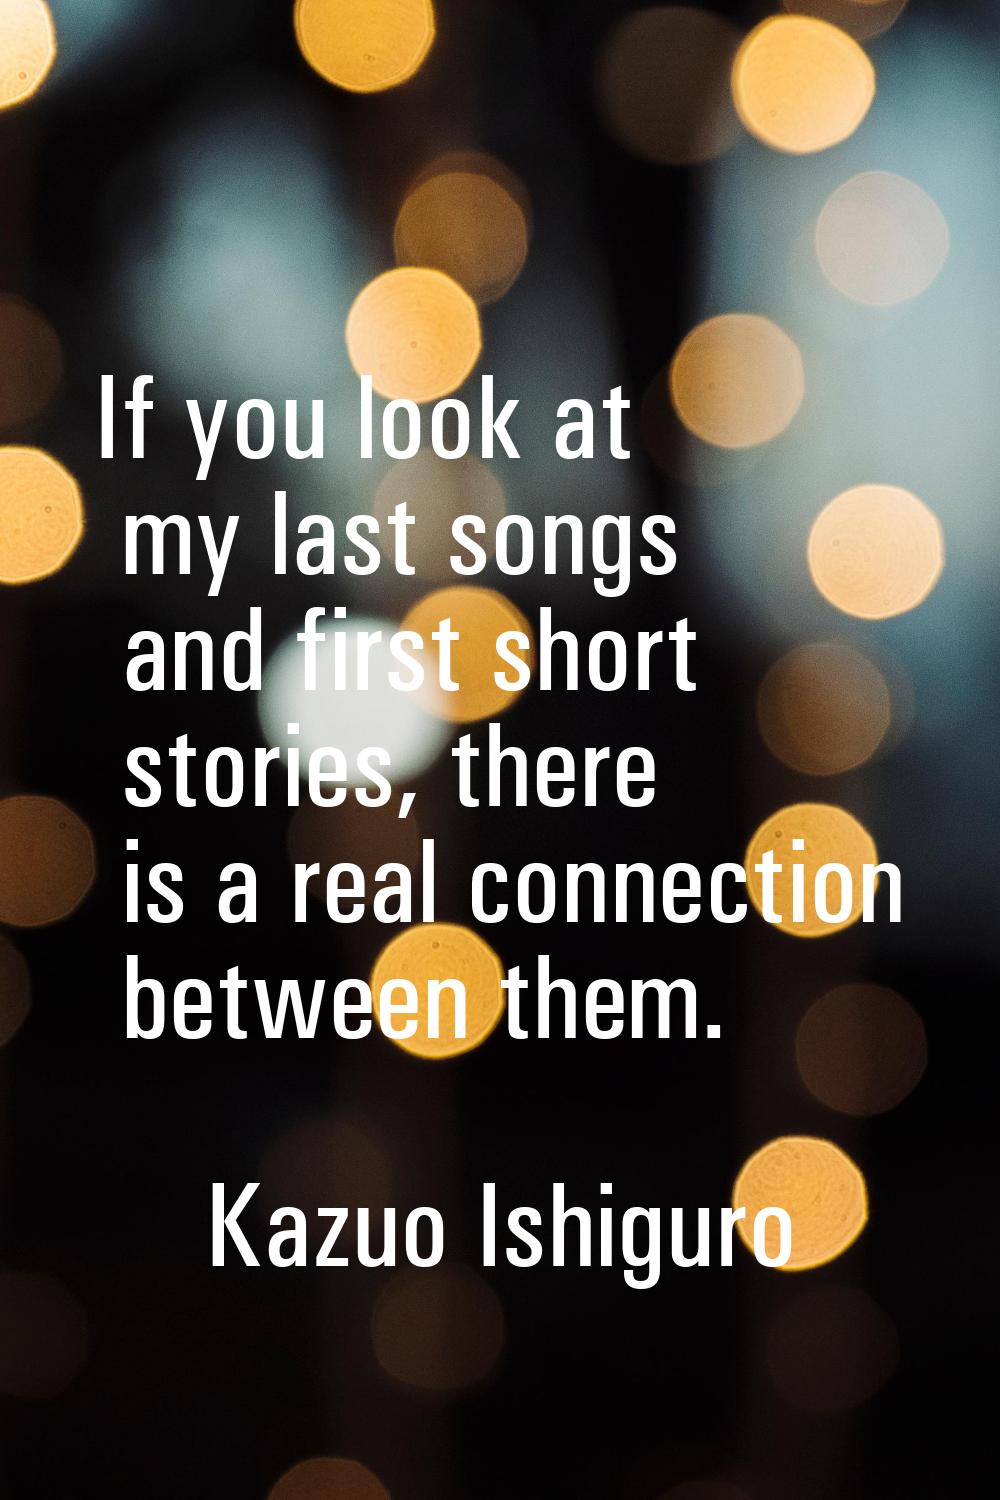 If you look at my last songs and first short stories, there is a real connection between them.